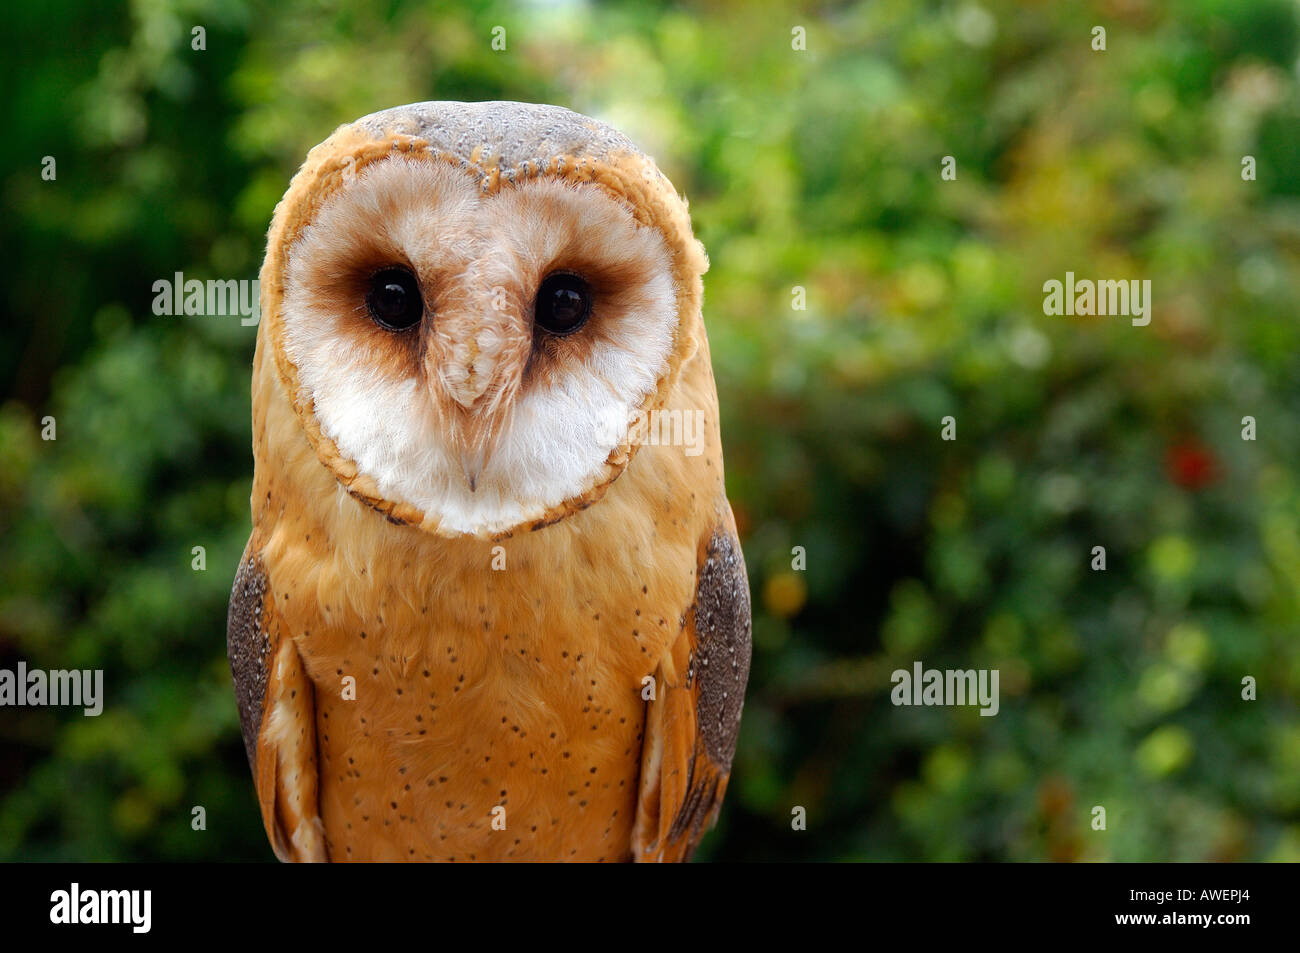 Close up portrait of a European Barn Owl Tyto alba against a woodland background staring straight ahead Stock Photo